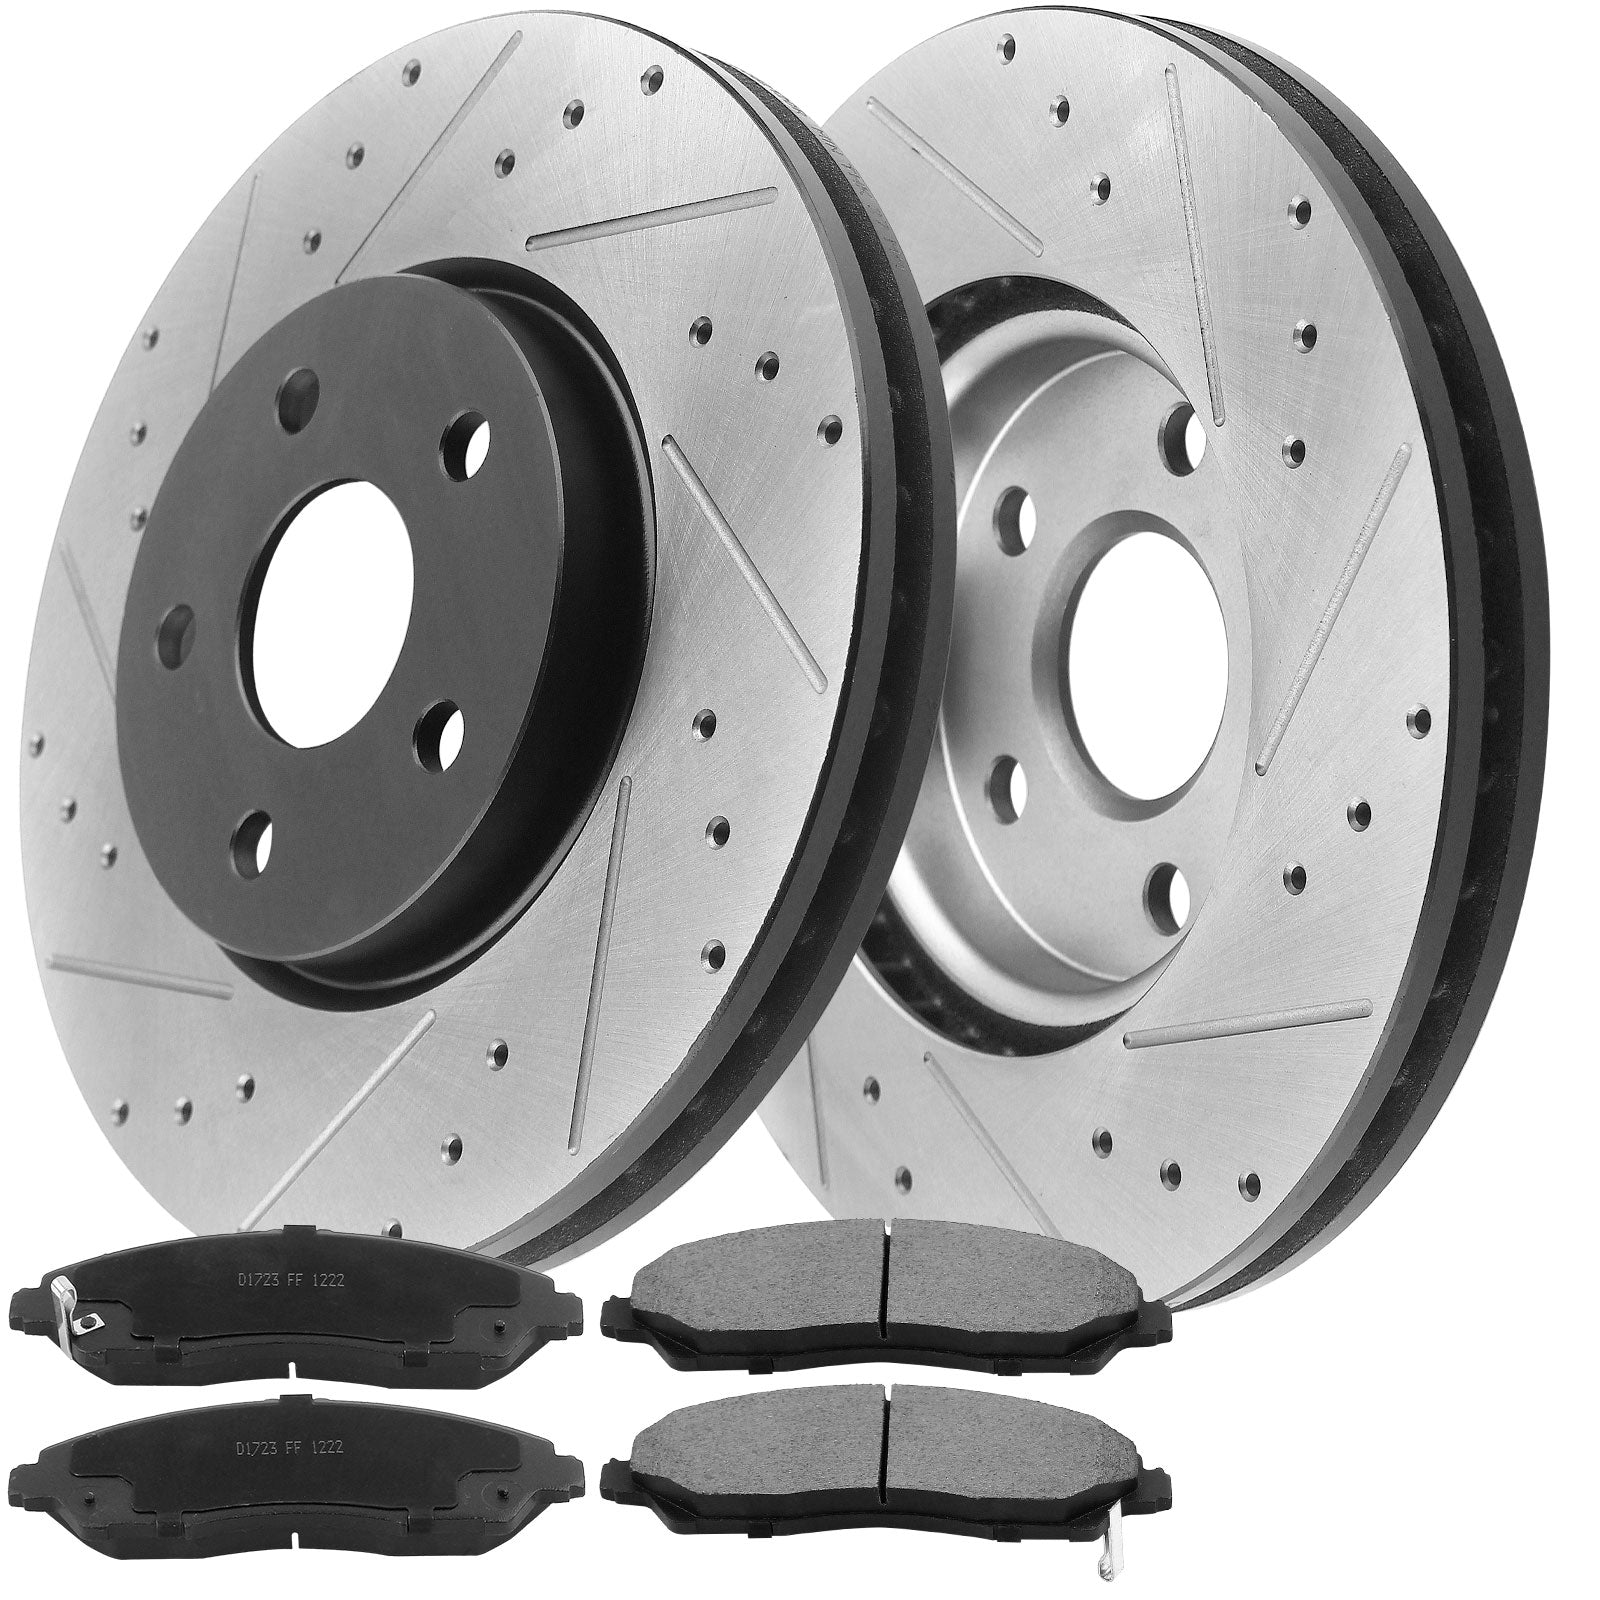 Front Drilled & Slotted Disc Brake Rotors + Ceramic Pads Fits for Acura MDX TL, Honda Odyssey Passport Pilot Ridgeline MotorbyMotor